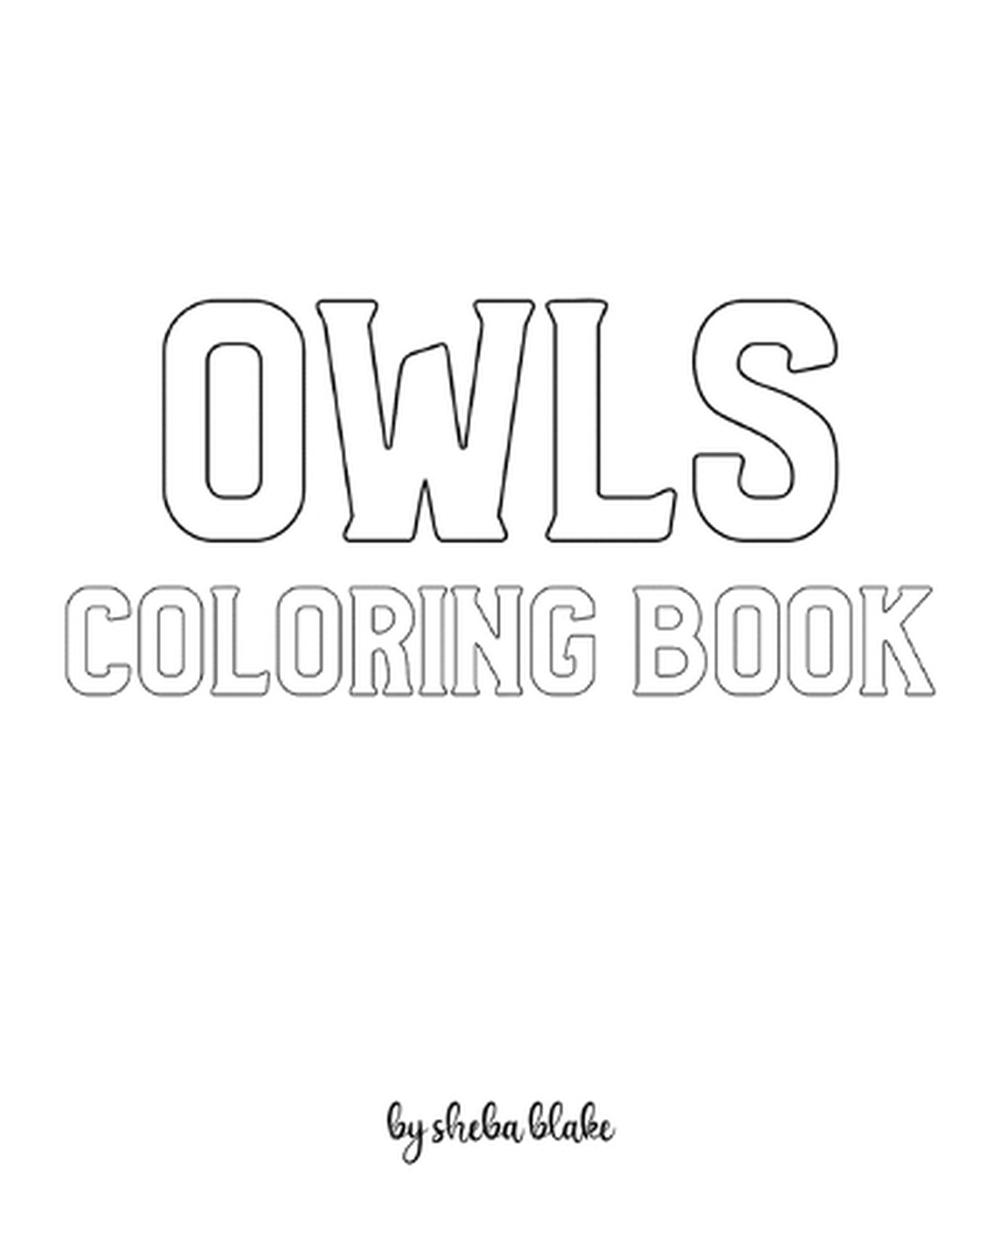 Download Owls With Scissor Skills Coloring Book For Children Create Your Own Doodle Cover 8x10 Softcover Personalized Coloring Book Activity Book By Sheba Blake Paperback 9781222313314 Buy Online At Moby The Great